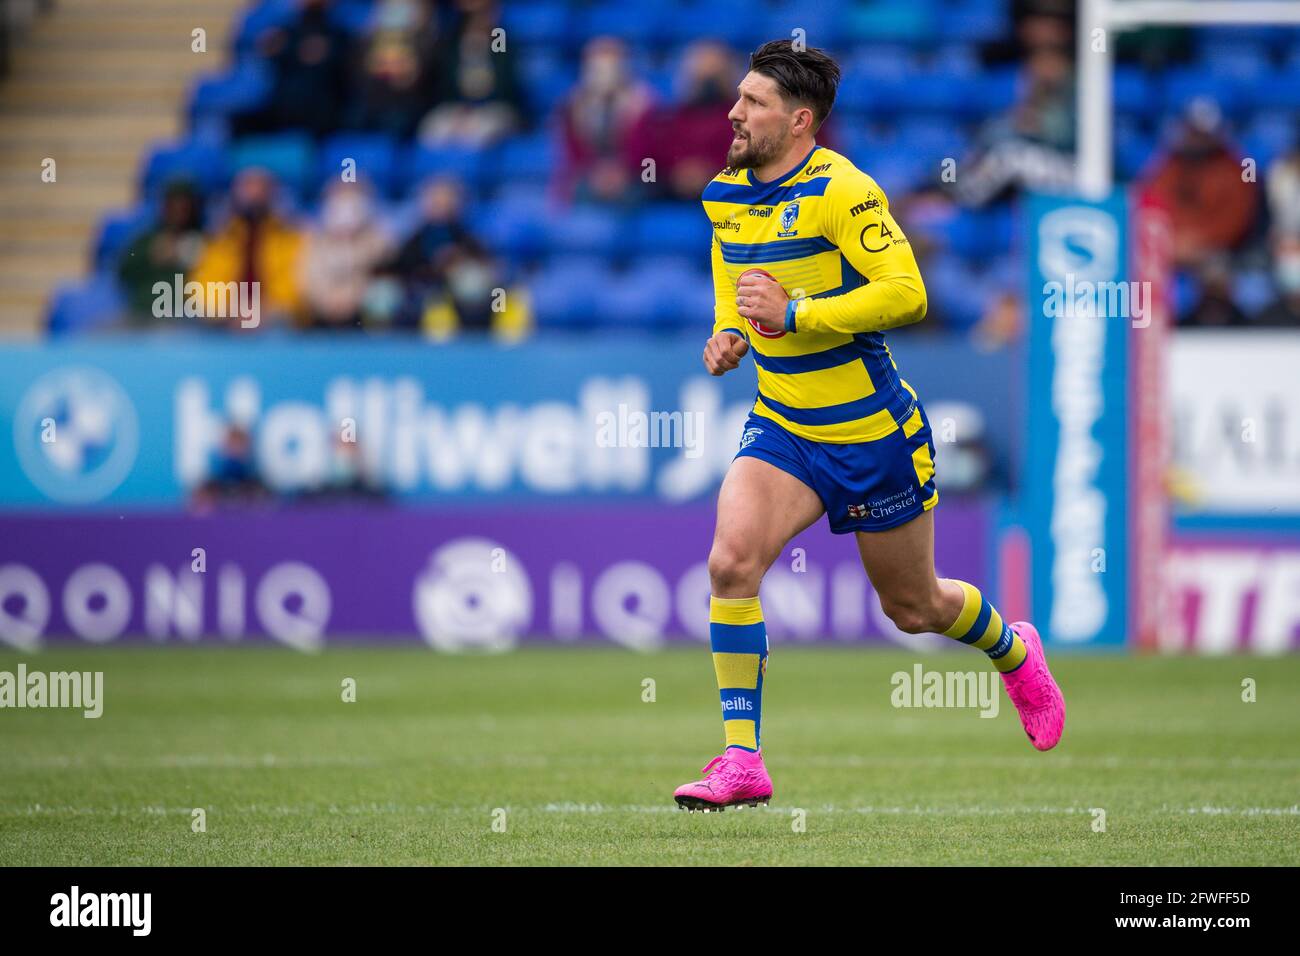 Gareth Widdop (7) of Warrington Wolves in, on 5/22/2021. (Photo by Craig Thomas/News Images/Sipa USA) Credit: Sipa USA/Alamy Live News Stock Photo